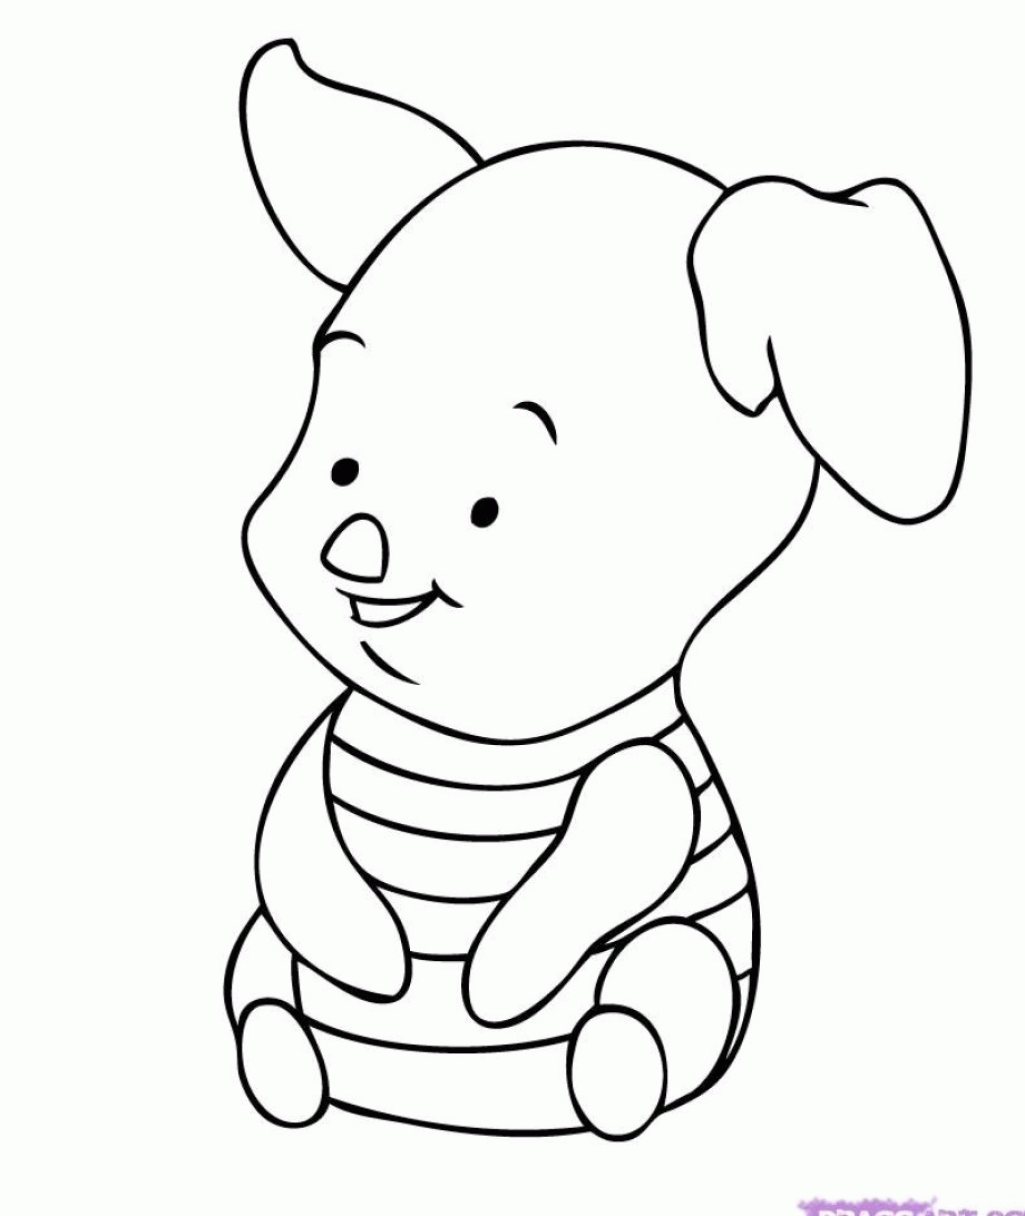 Free Printable Cartoon Characters Coloring Pages, Download Free